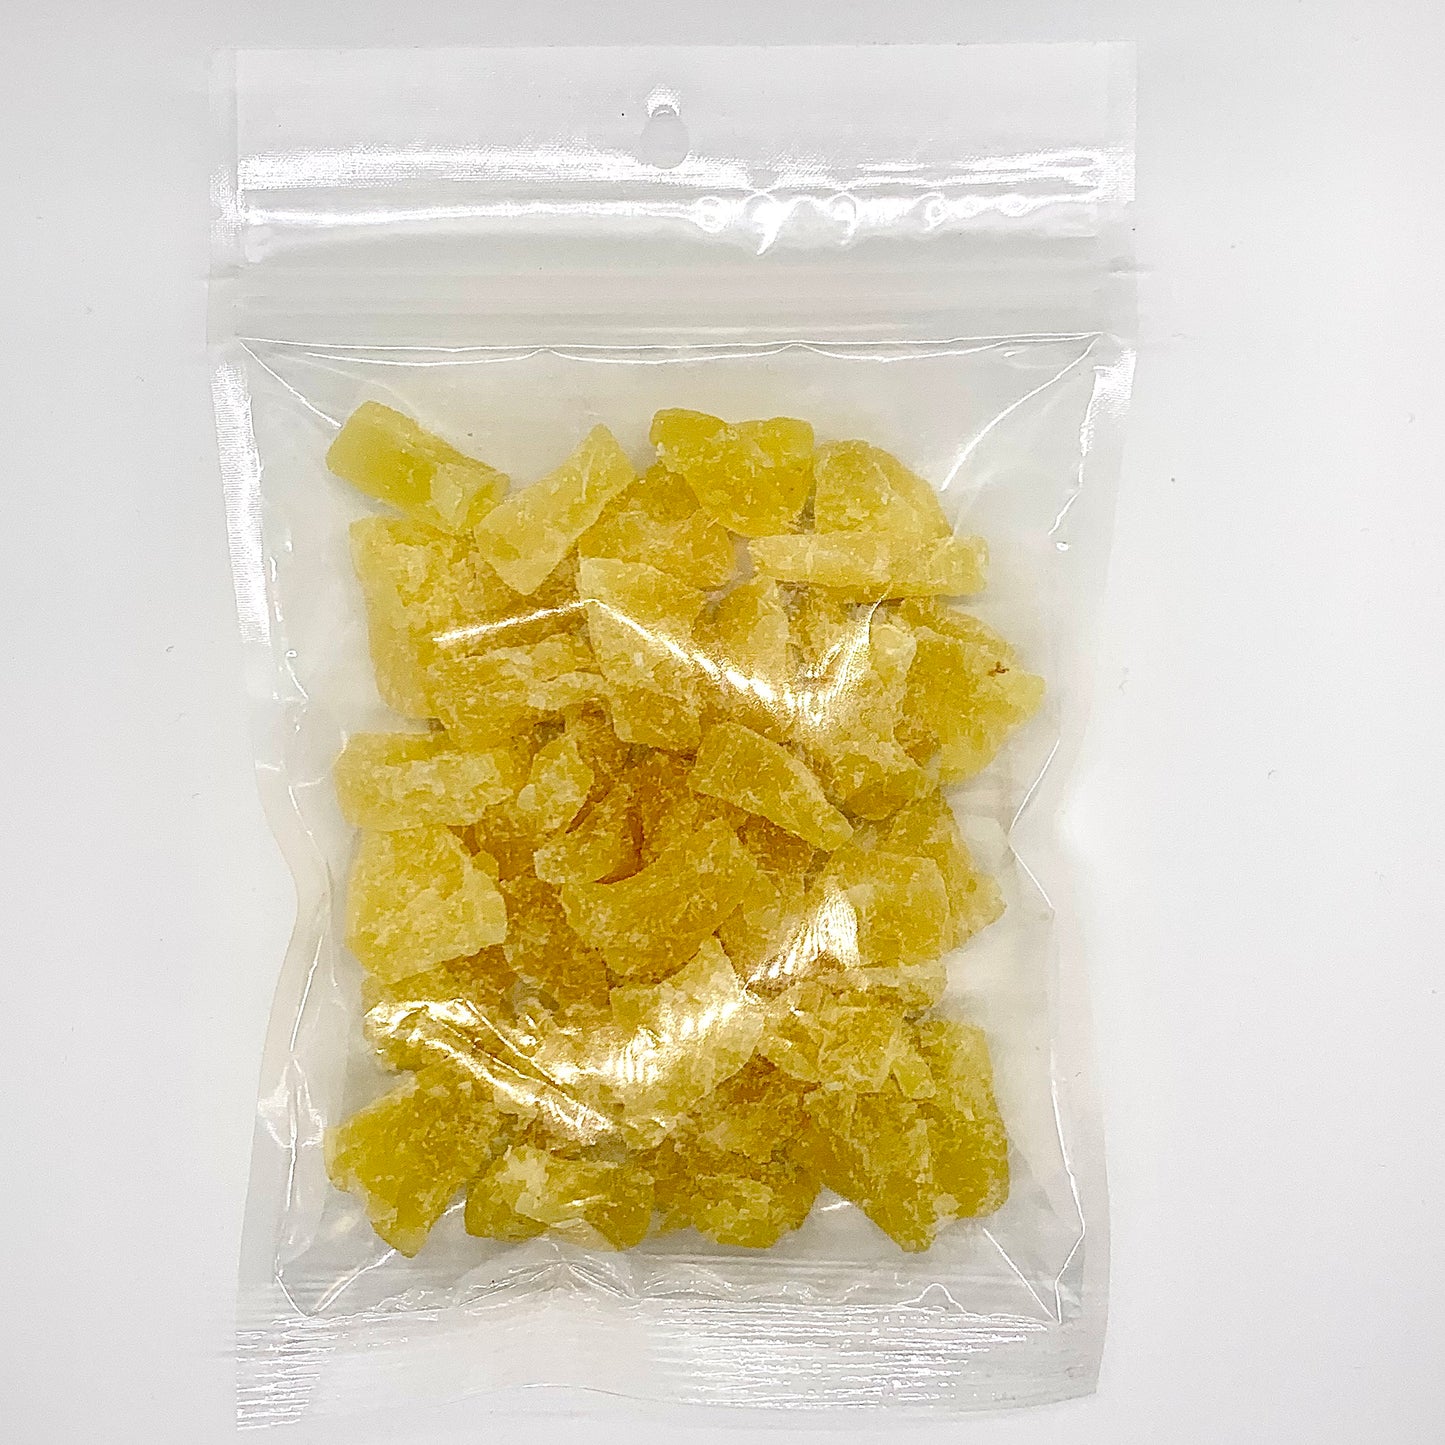 (NEW) Pineapple Chunks - Wholesale Unlimited Inc.